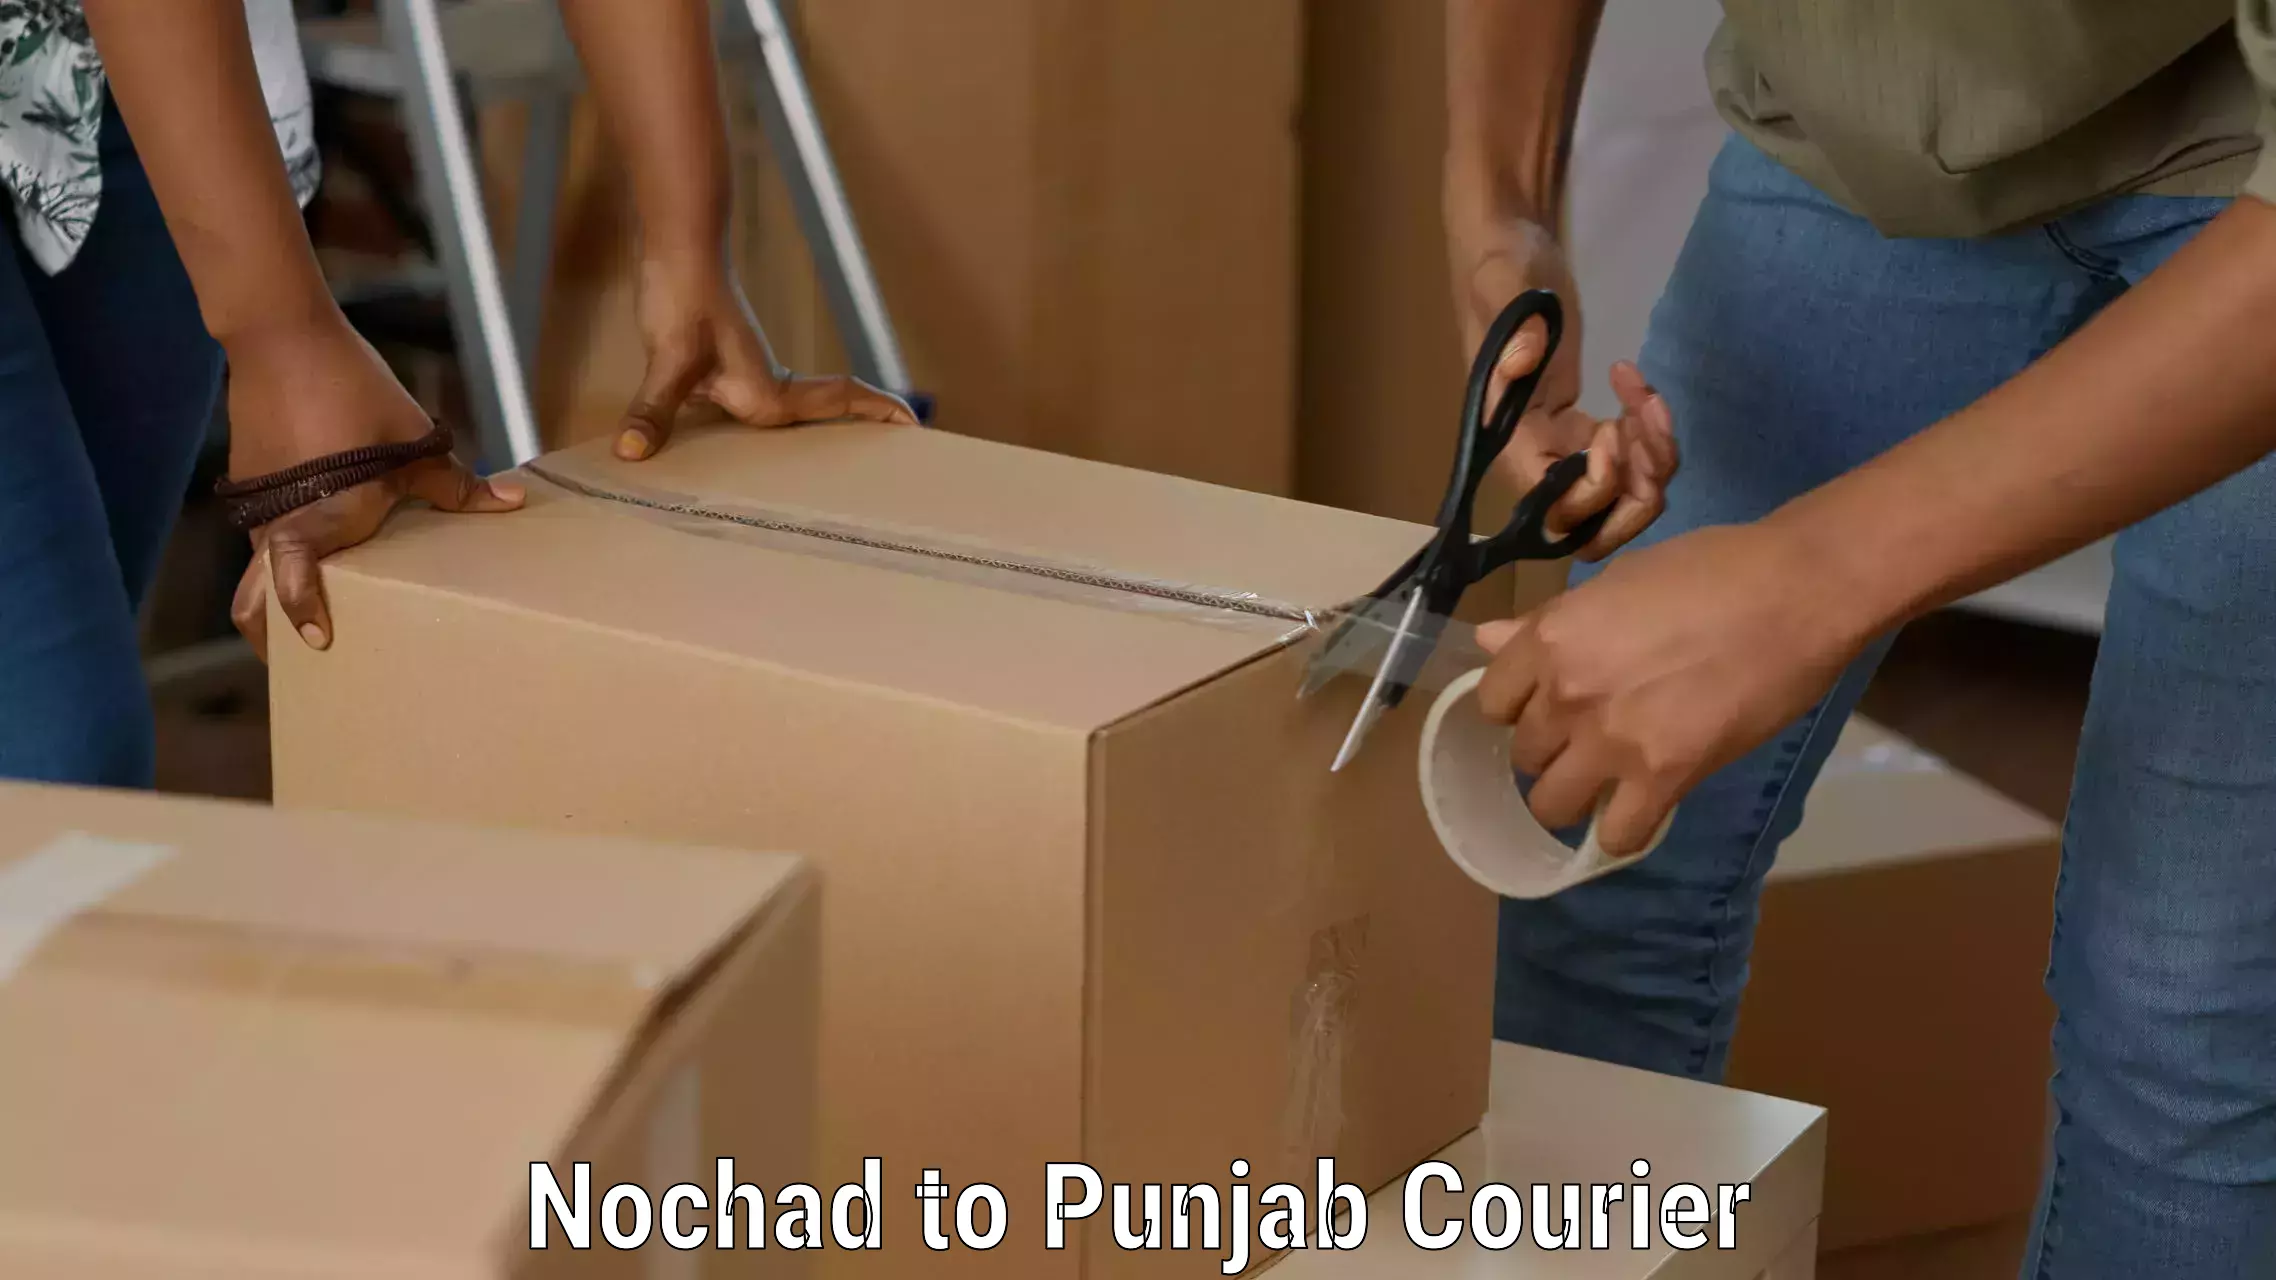 Easy access courier services Nochad to Moga